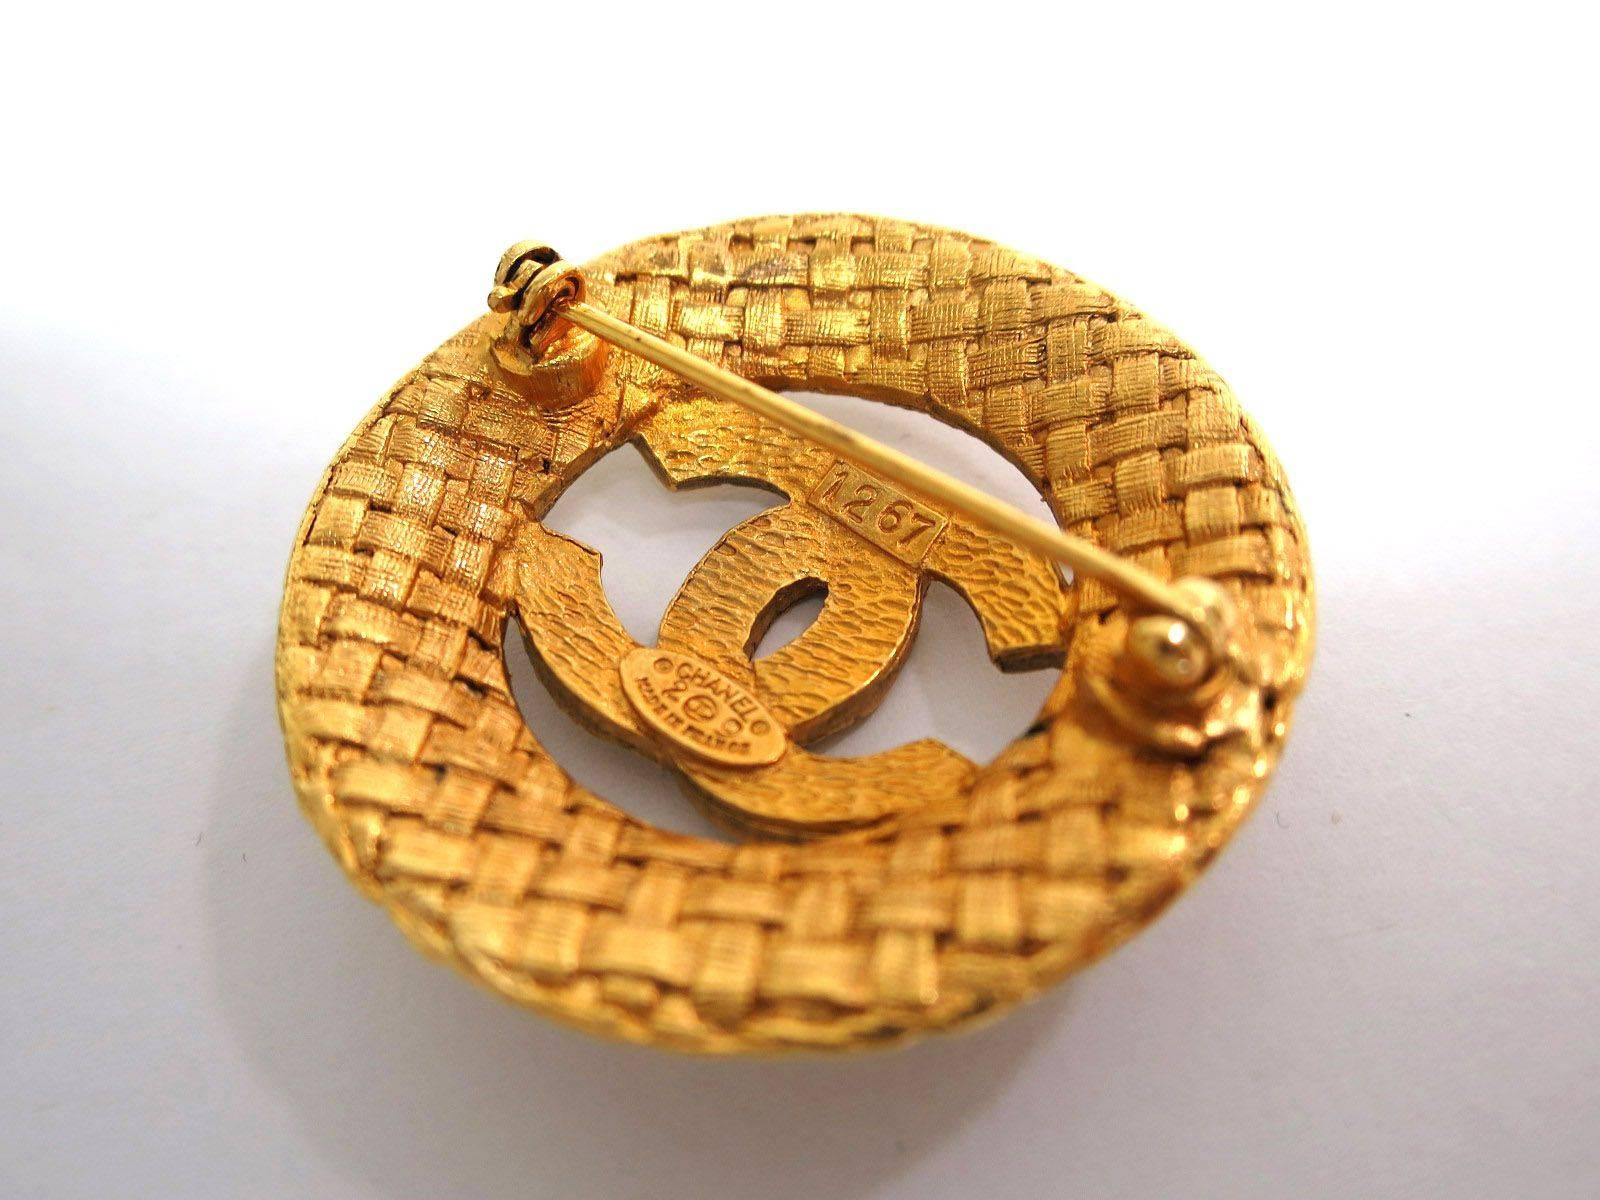 Chanel Gold Textured Logo Round Evening Pin Brooch in Box

Metal
Gold tone
Turn lock pin closure
Made in France
Measures 1.5